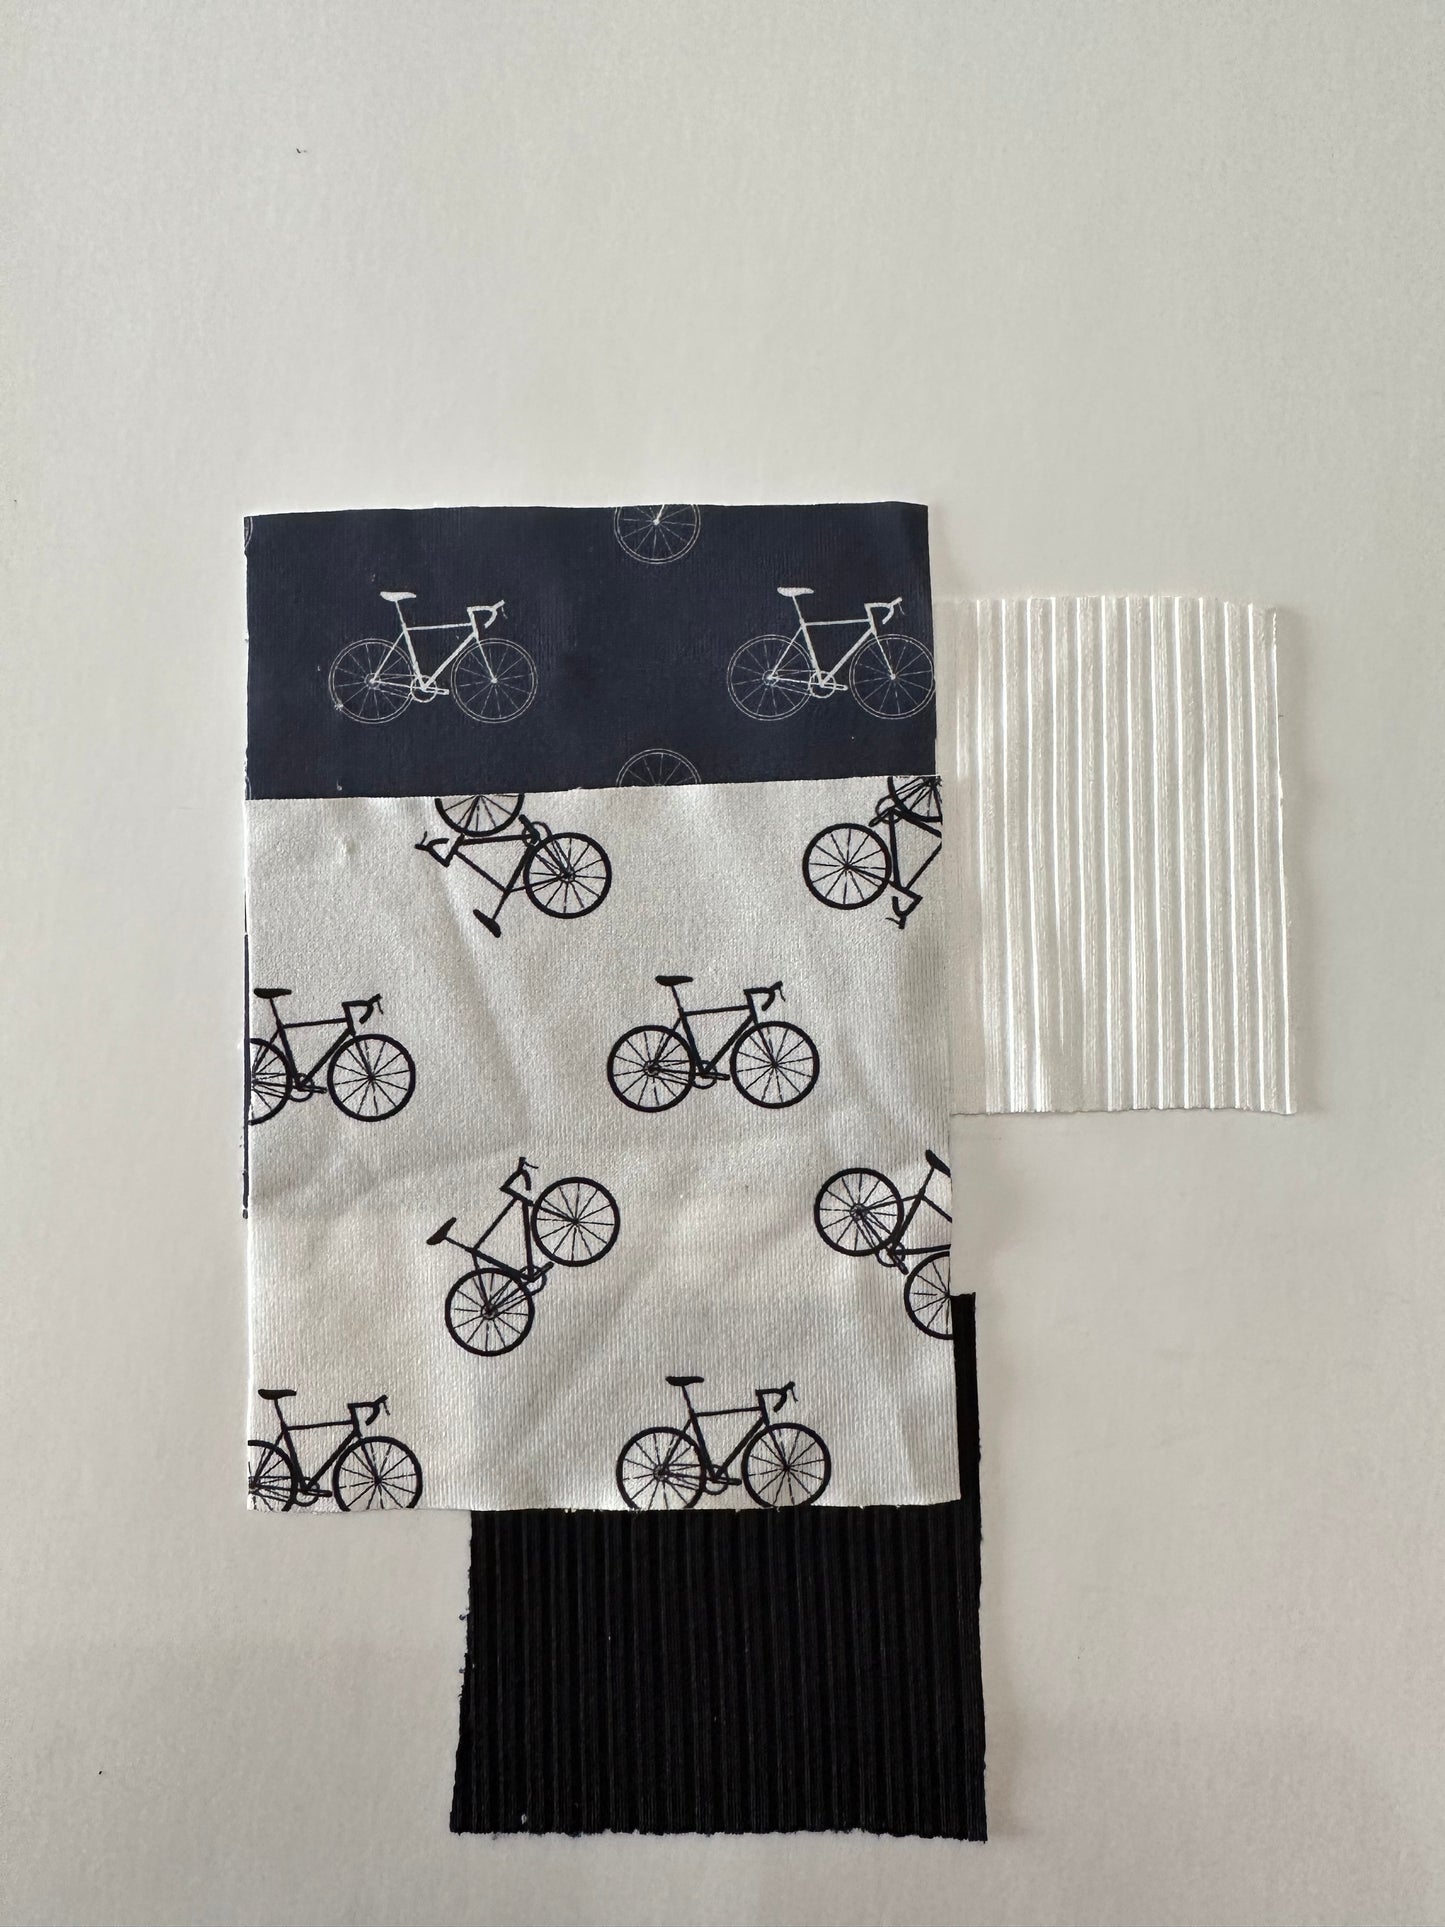 Bikes in Navy on Imitation Cotton Jersey Knit Fabric Sold by the 1/4 yard